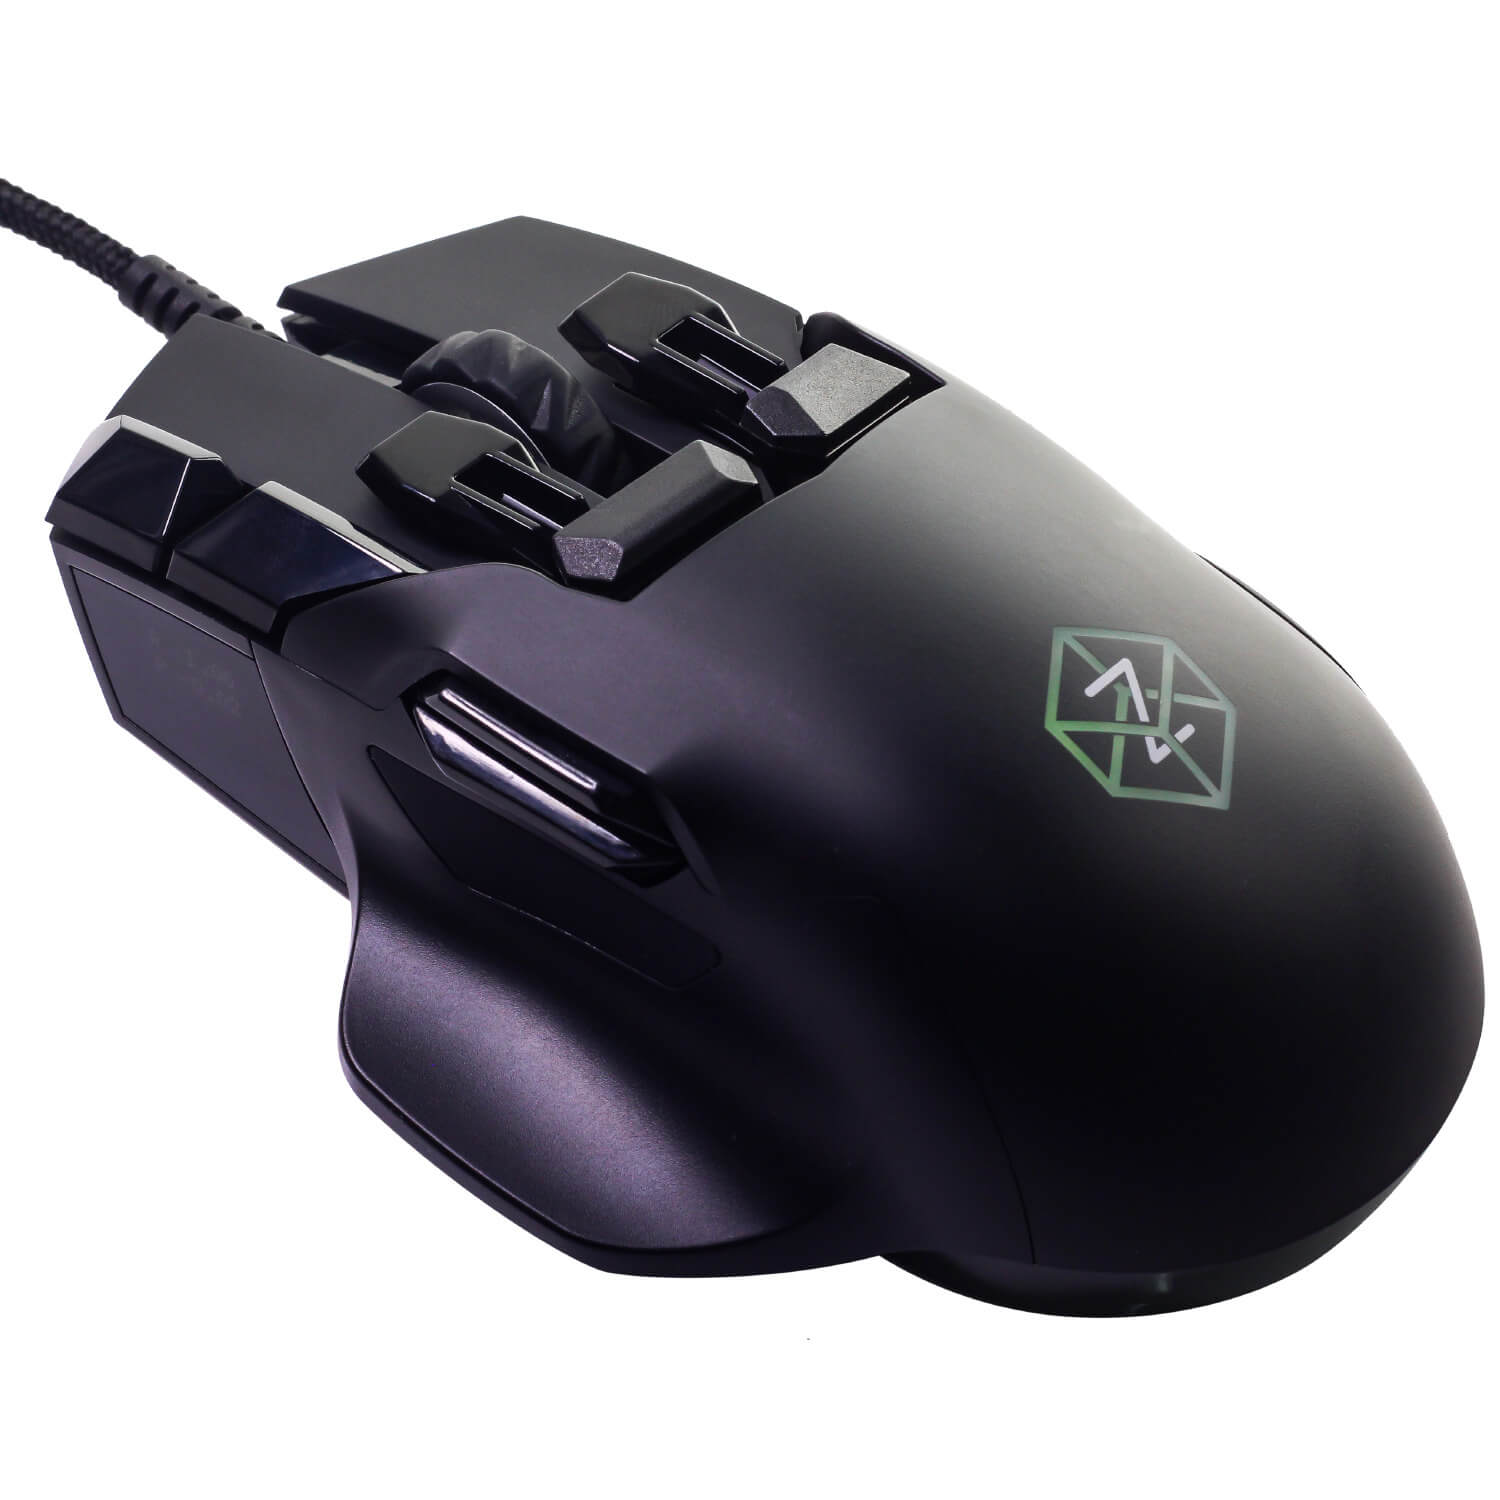 Swiftpoint Singapore - Swiftpoint Z Gaming mouse - Ante Shop